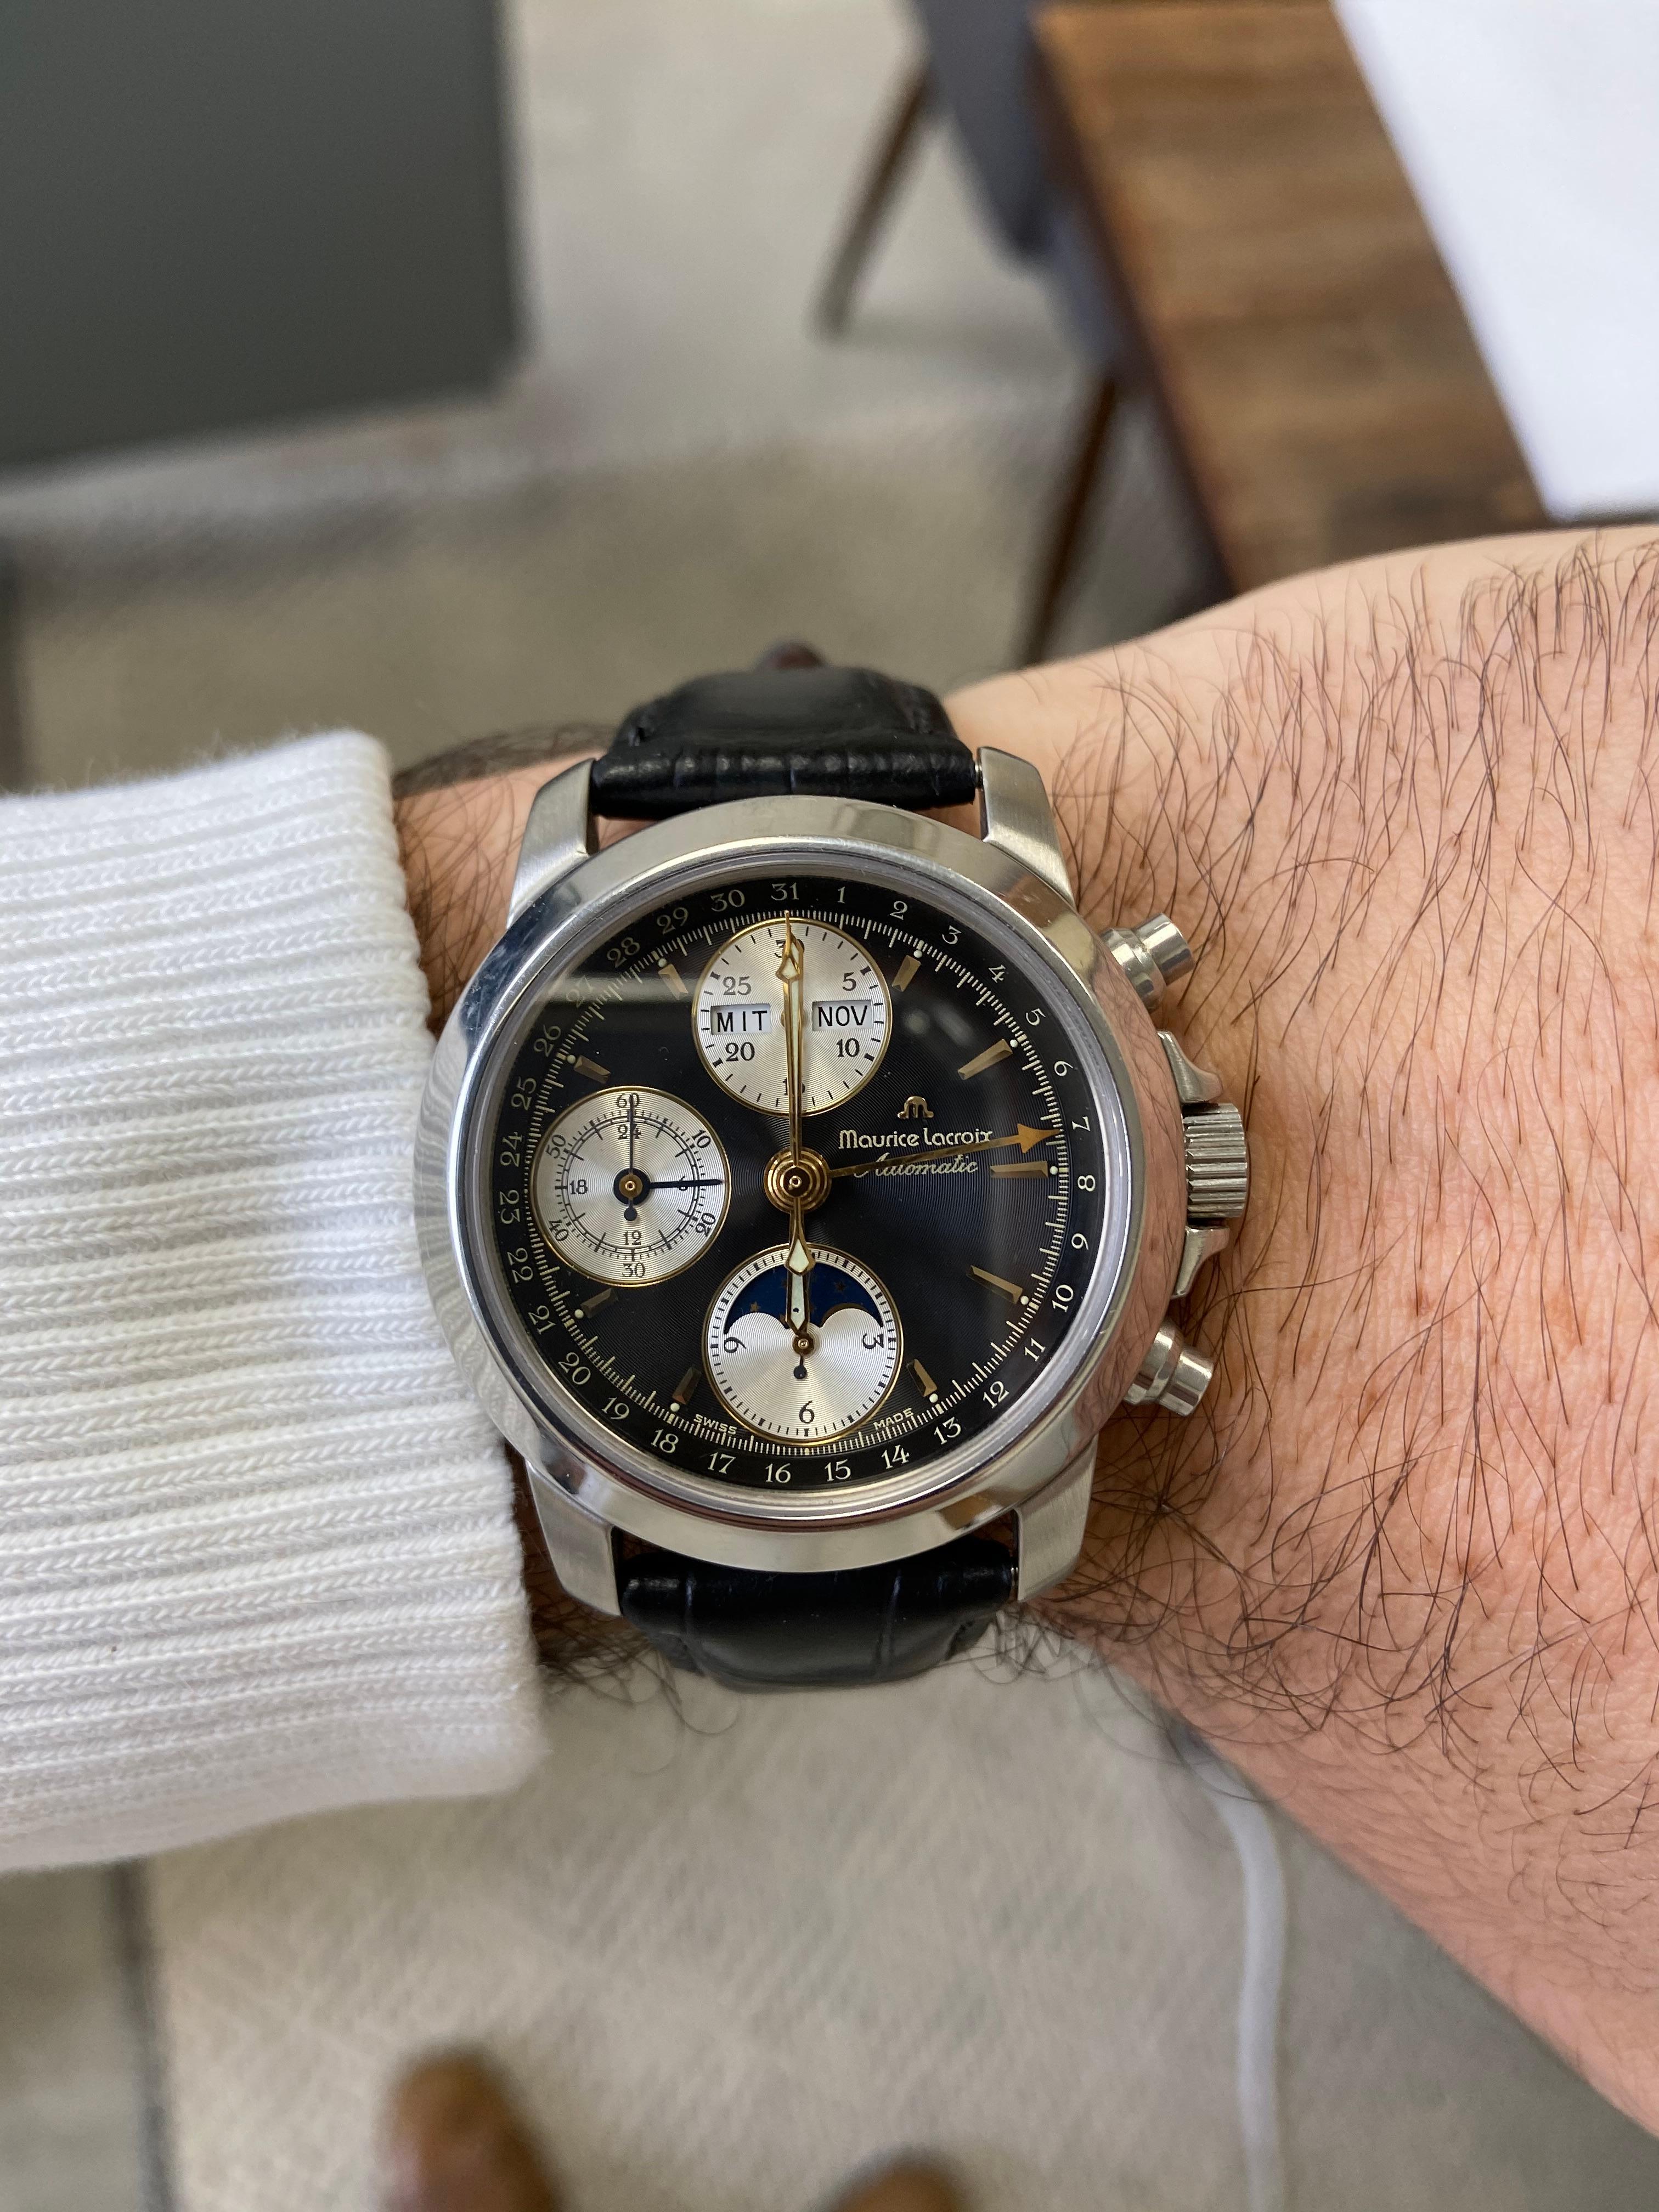 Here is a beautiful entry level automatic Maurice Lacroix watch.
Has a day, month and date display in German.
Chronograph option and elegant look makes this a great everyday watch and also a perfect dress watch for a dinner at a nice